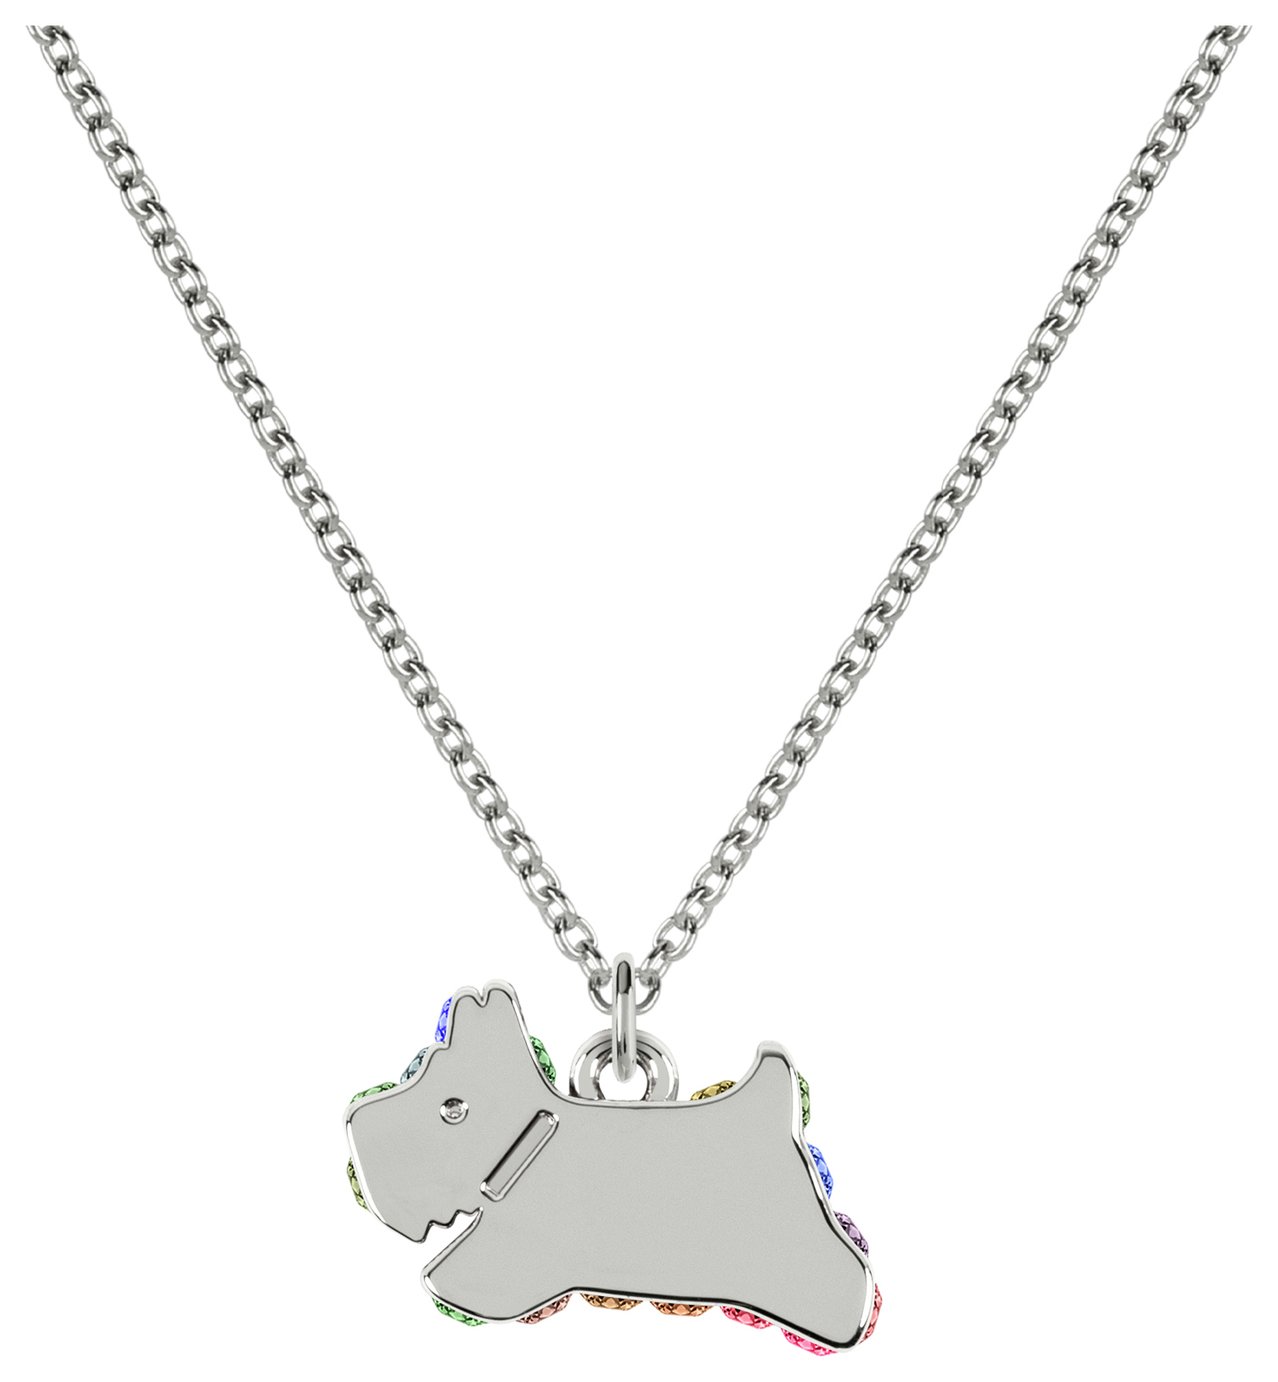 Radley Silver Plated Cubic Zirconia Dog Charm Necklace